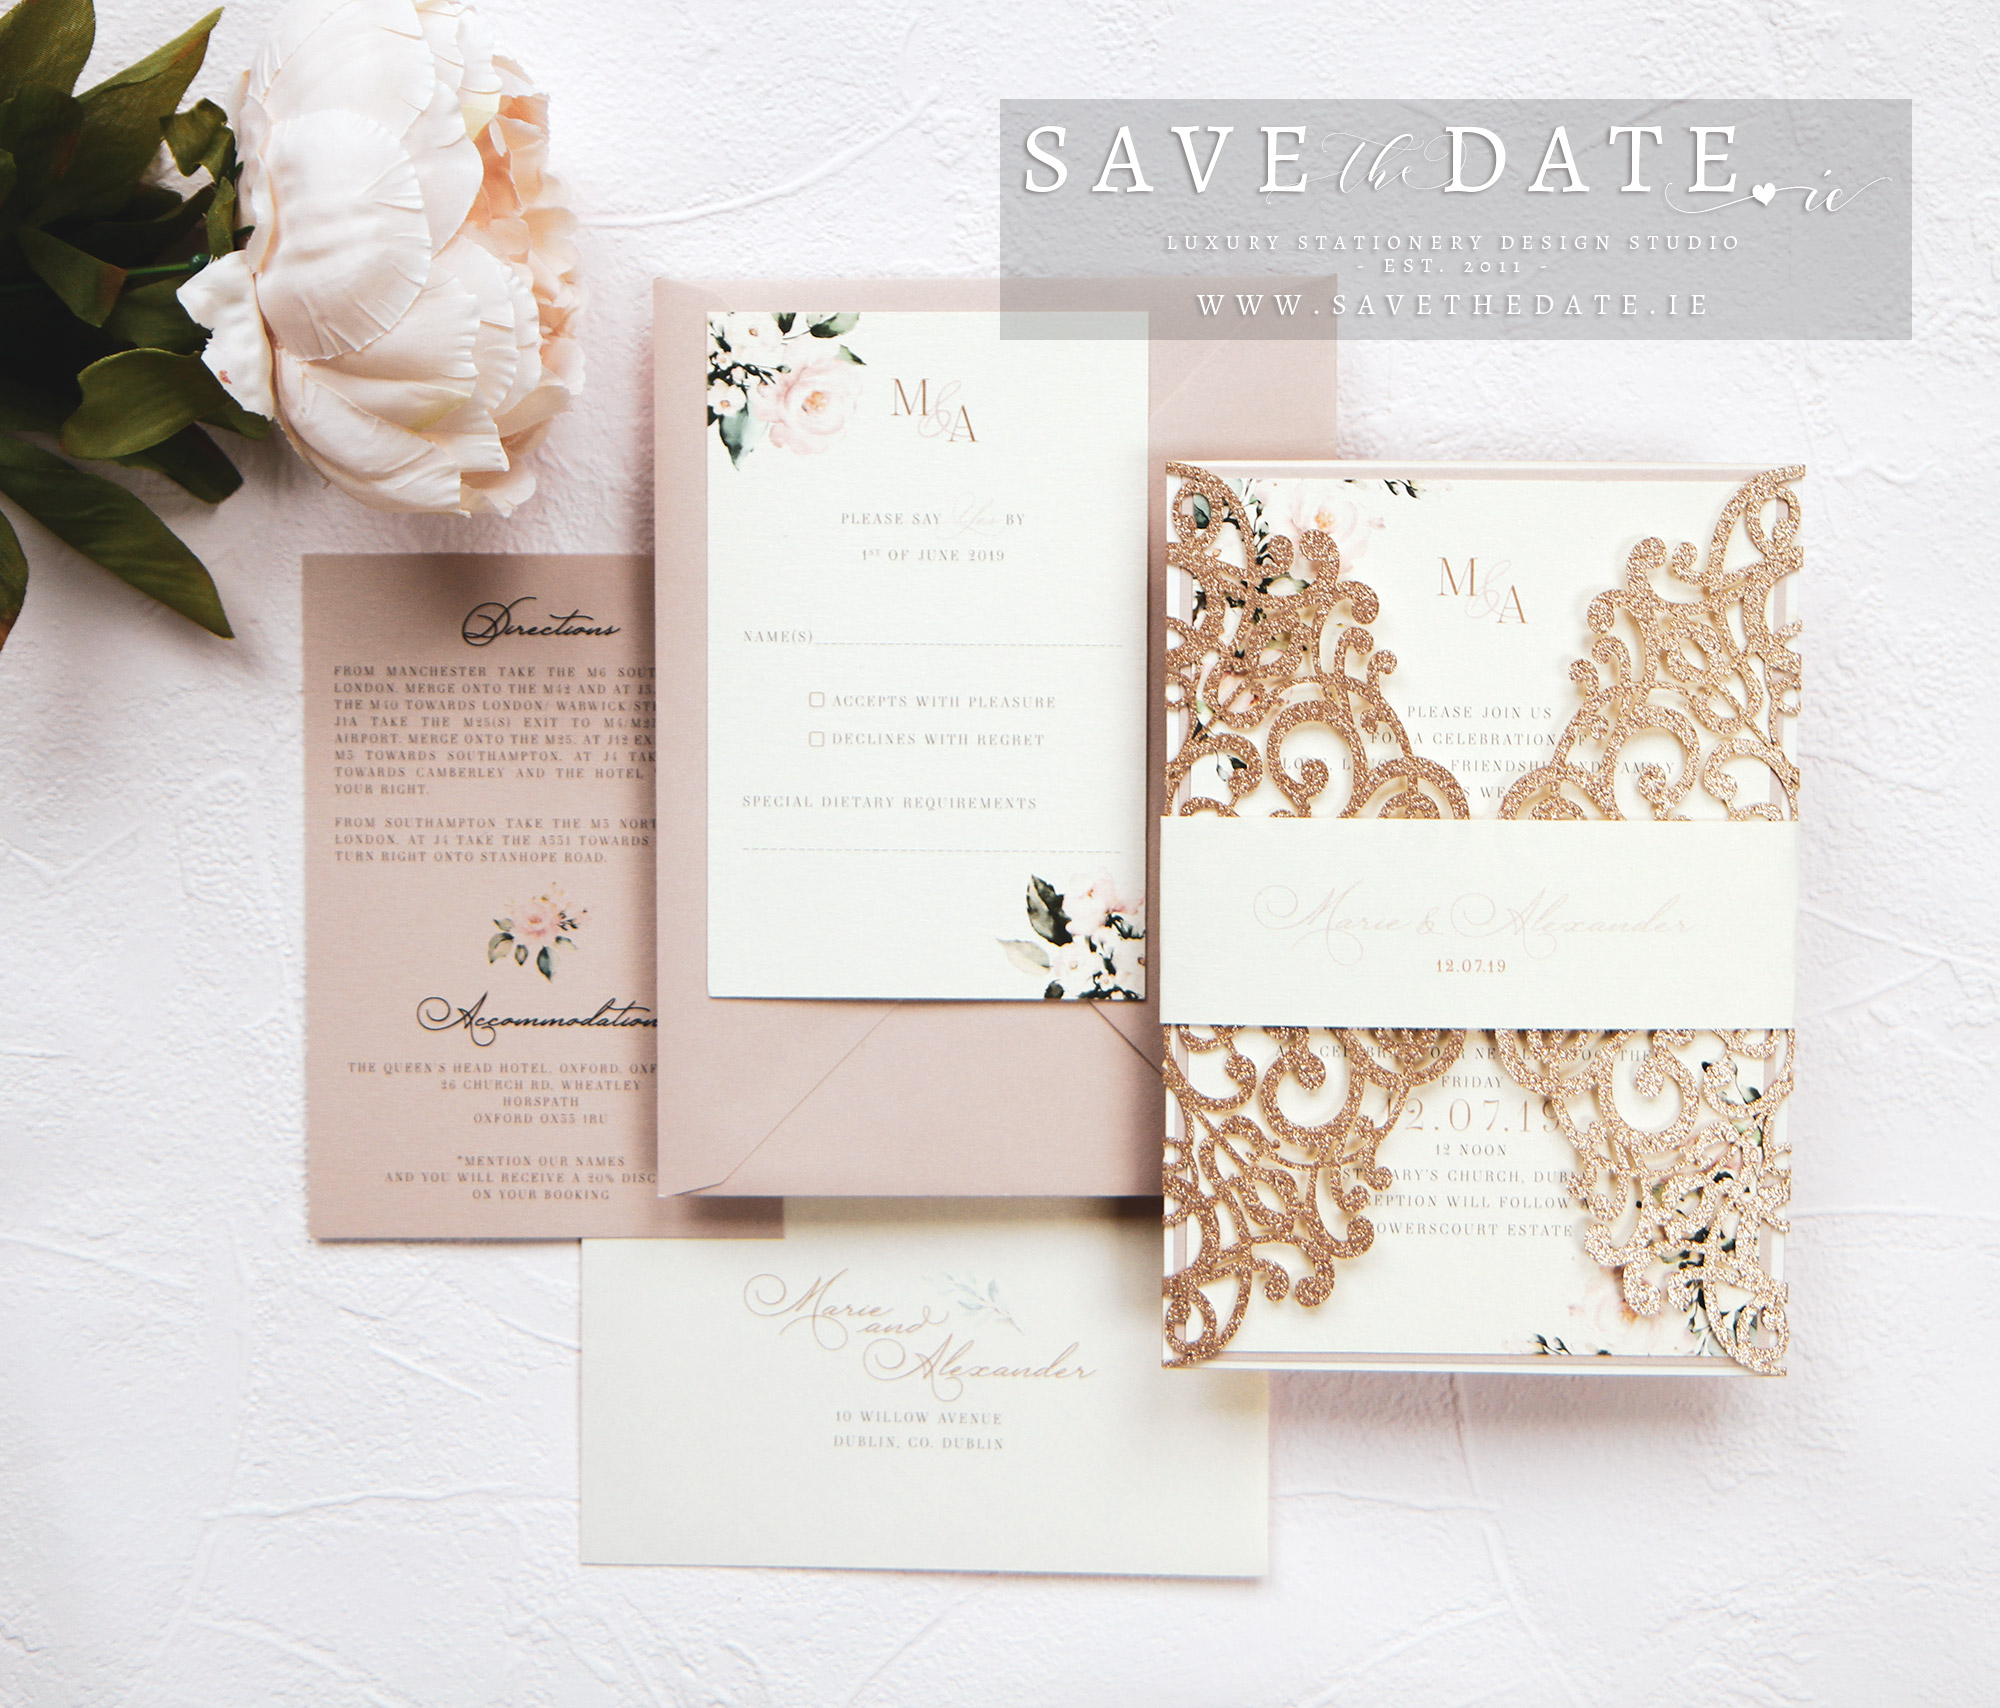 Personalised Save the Date Wedding Cards BLUSH FLORAL packs of 10 